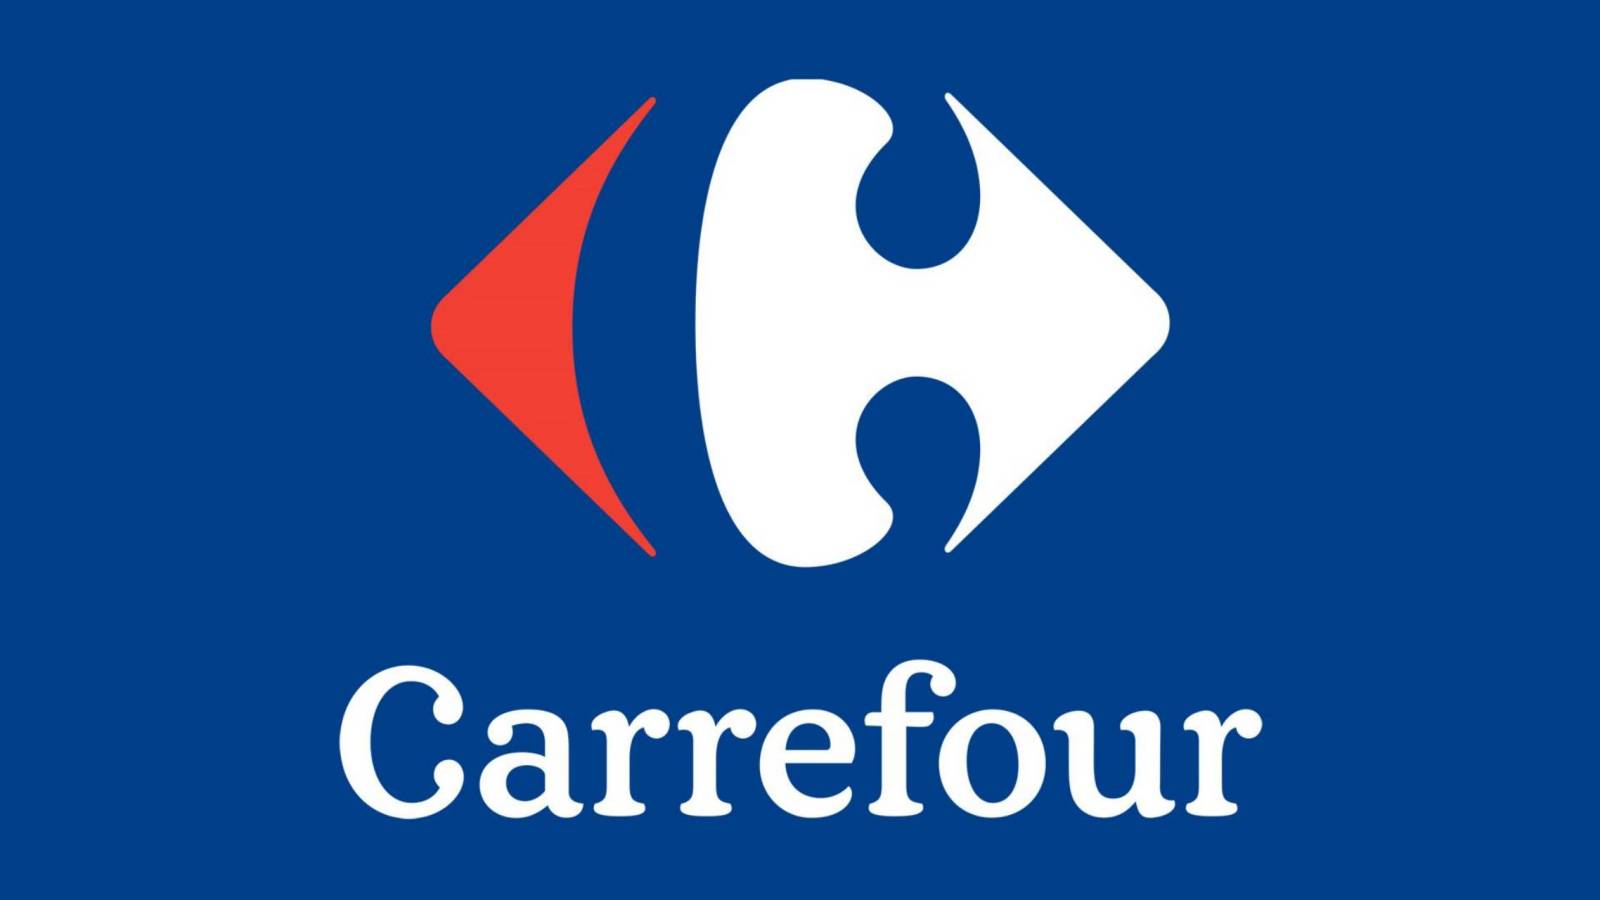 Carrefour automatisering